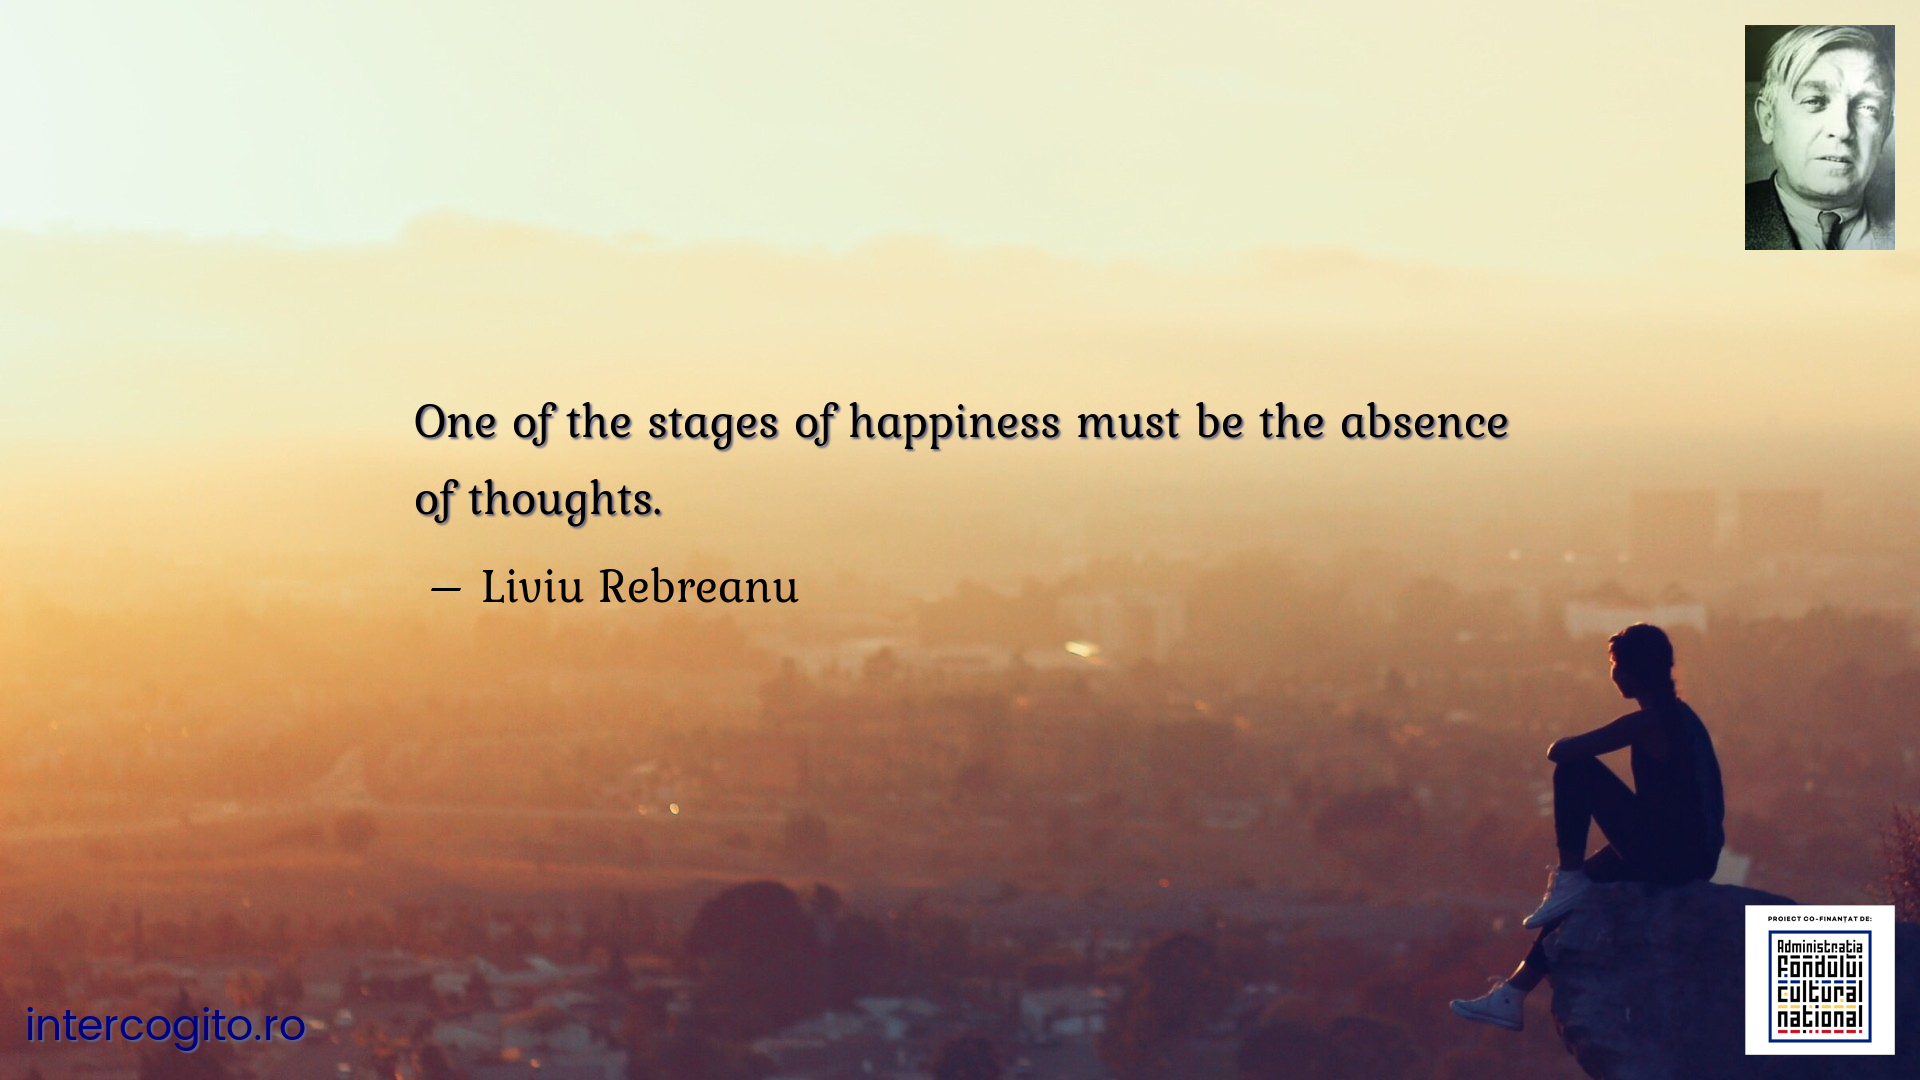 One of the stages of happiness must be the absence of thoughts.